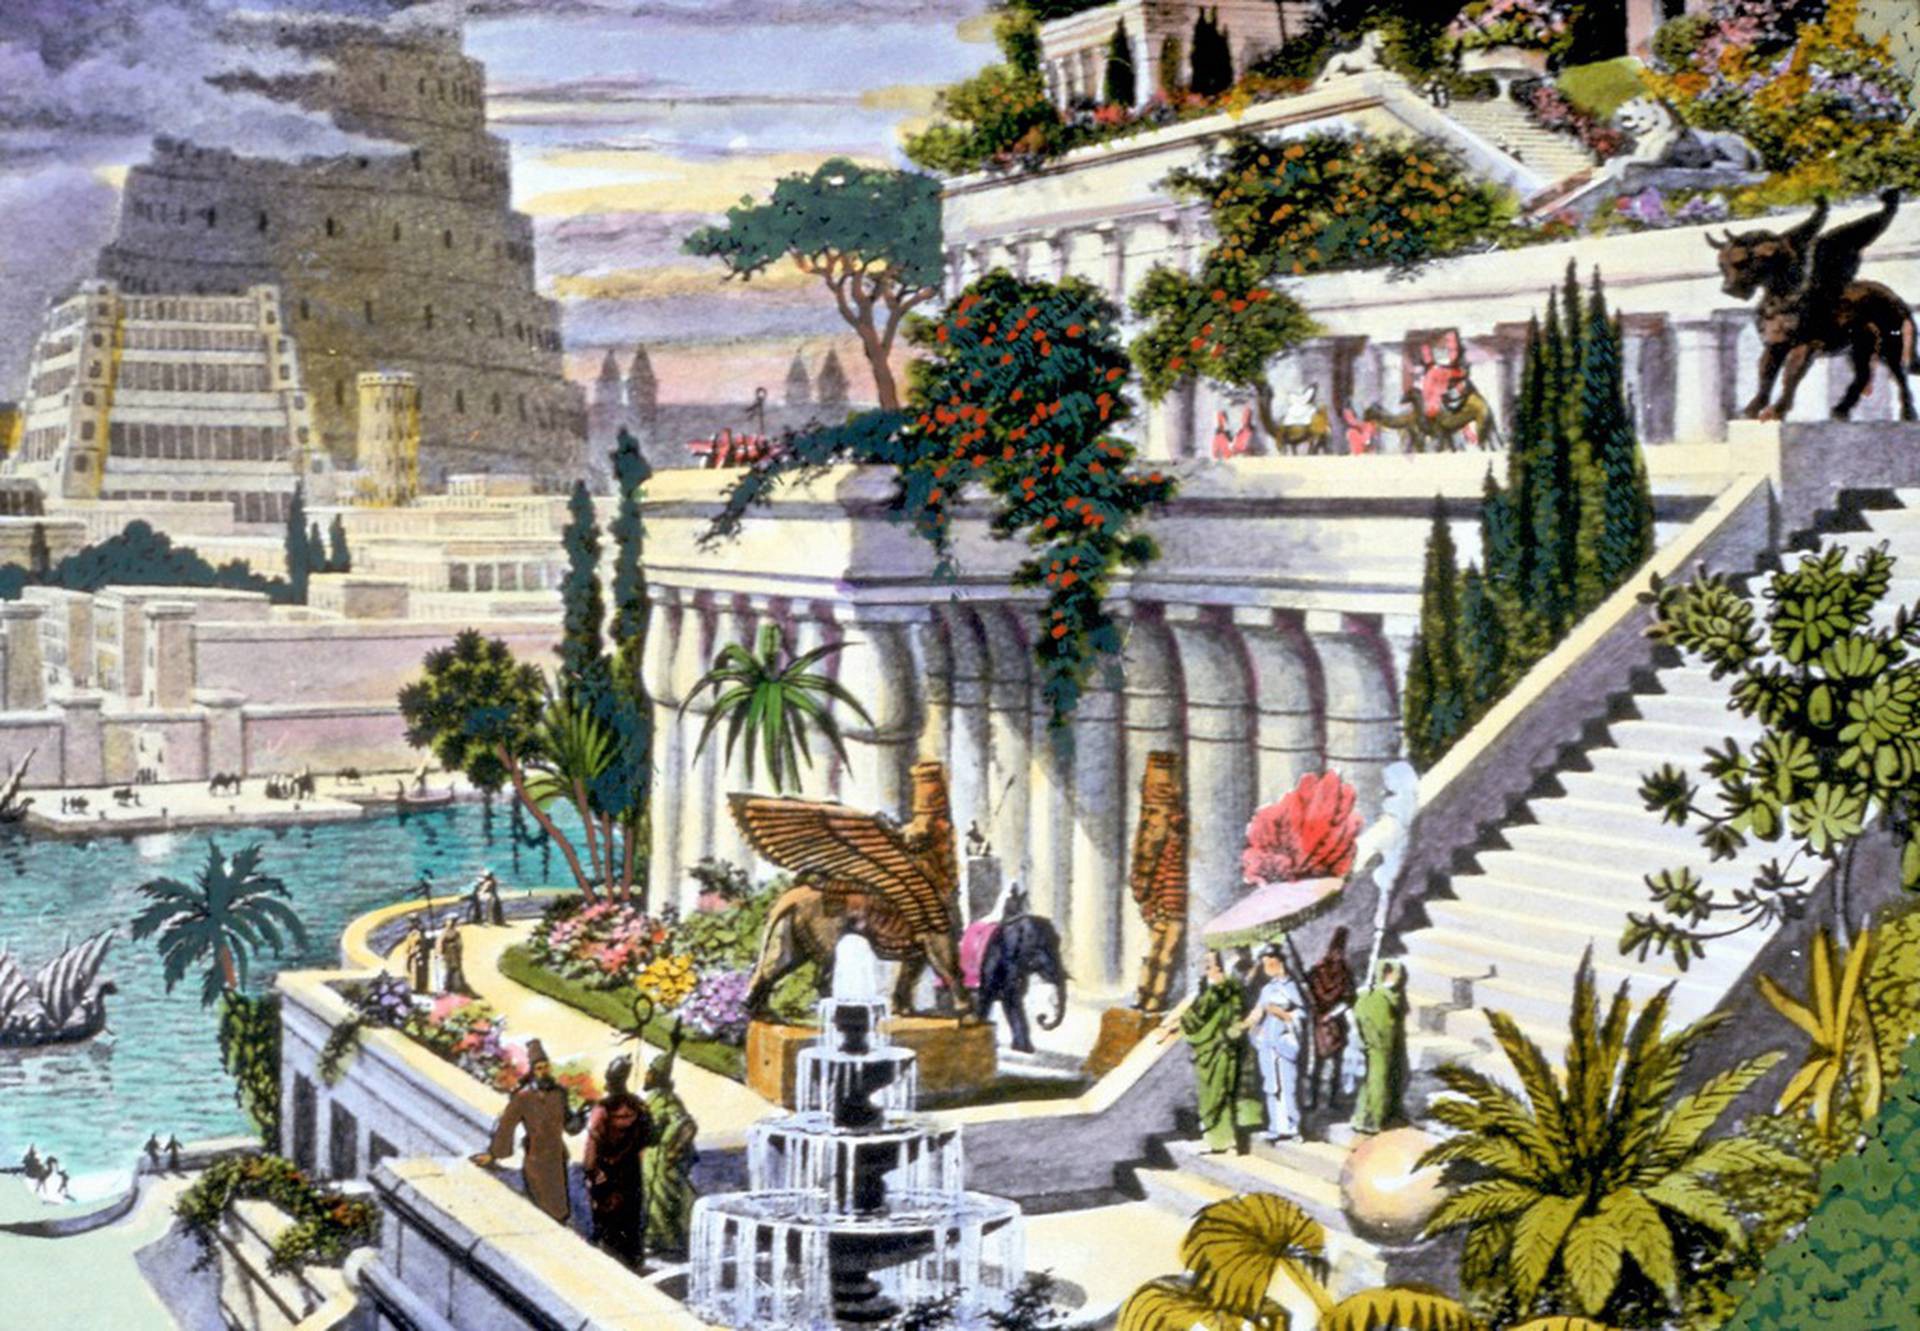 Engraving depicting the Hanging Gardens of Babylon, one of the Seven Wonders of the World. Artist unknown, 19th c.